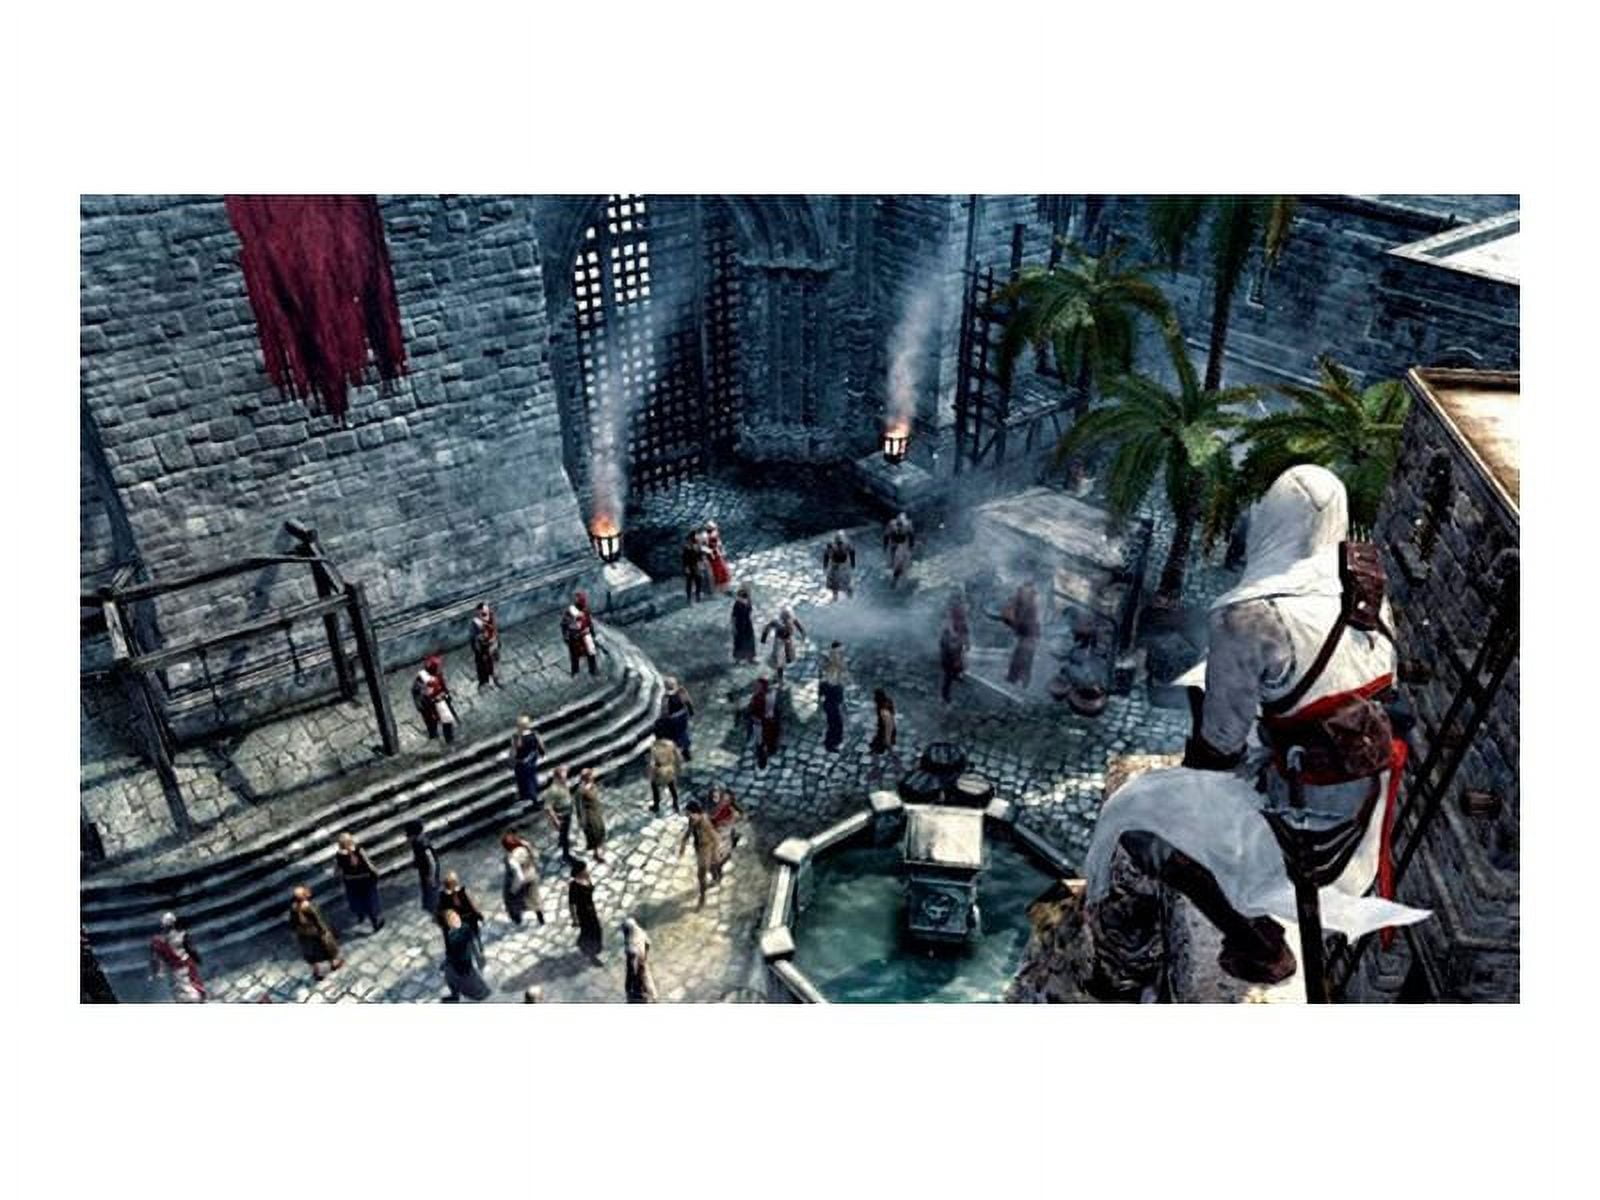 PSP - Assassin's Creed: Bloodlines - Start Screen : Free Download